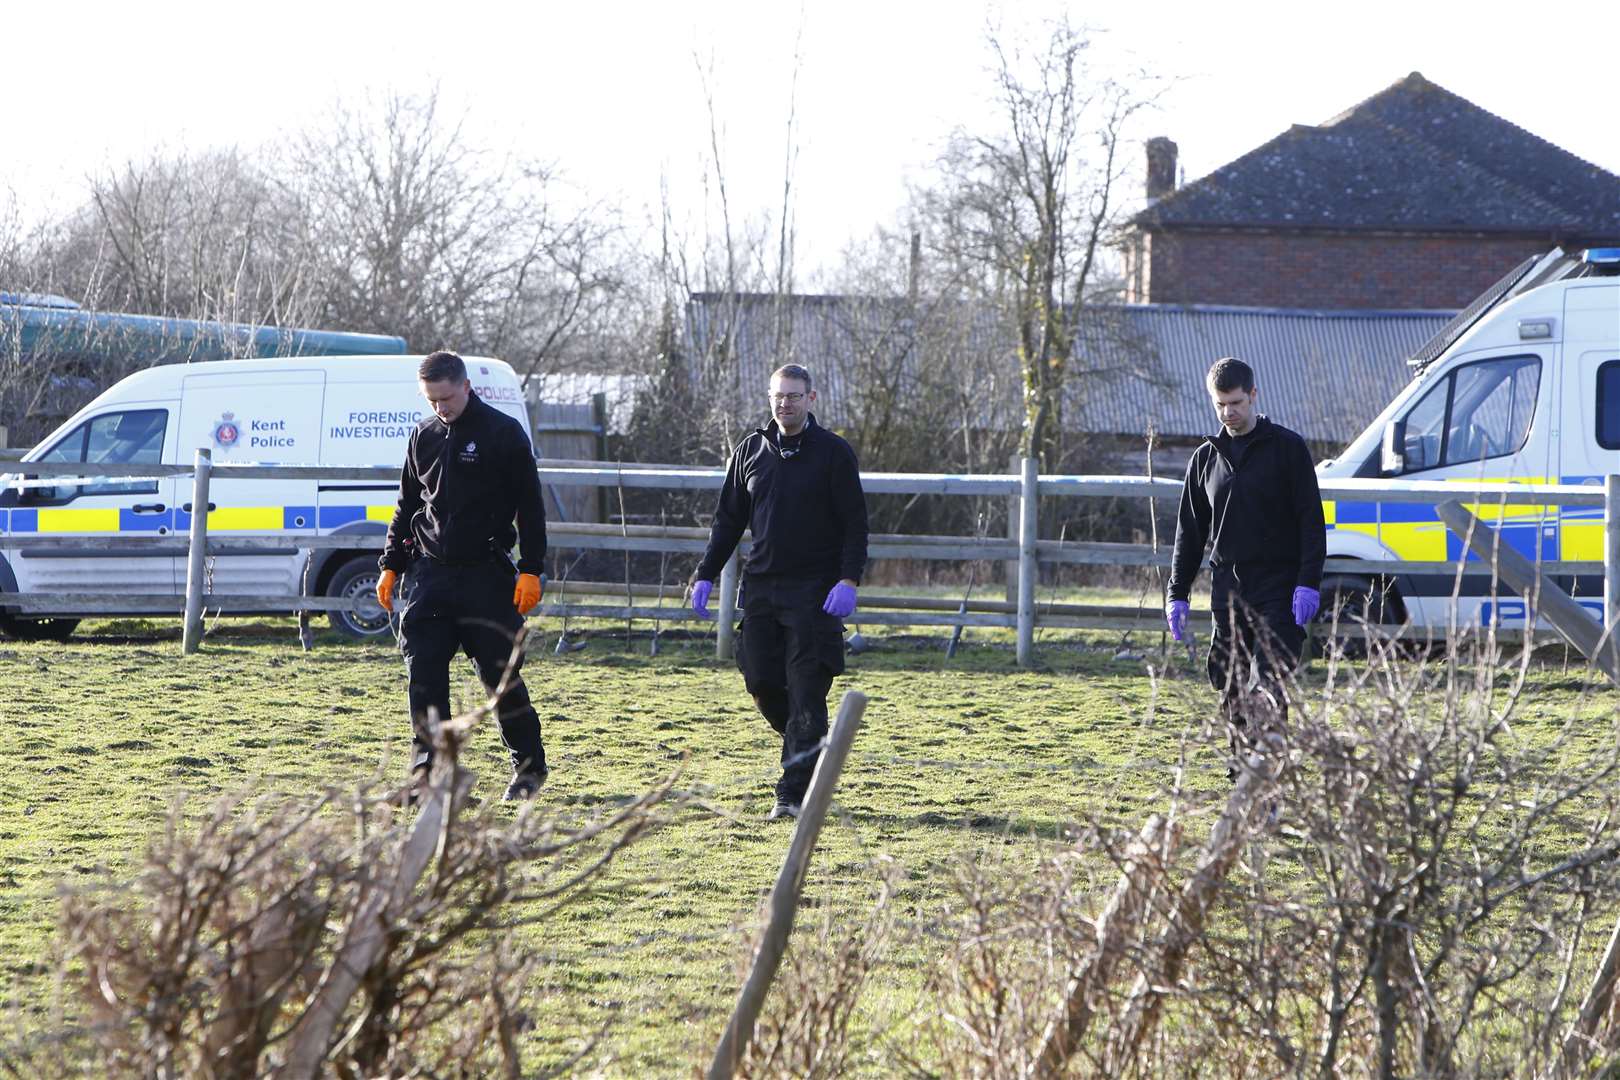 Officers at the scene of the alleged violence Picture: Andy Jones